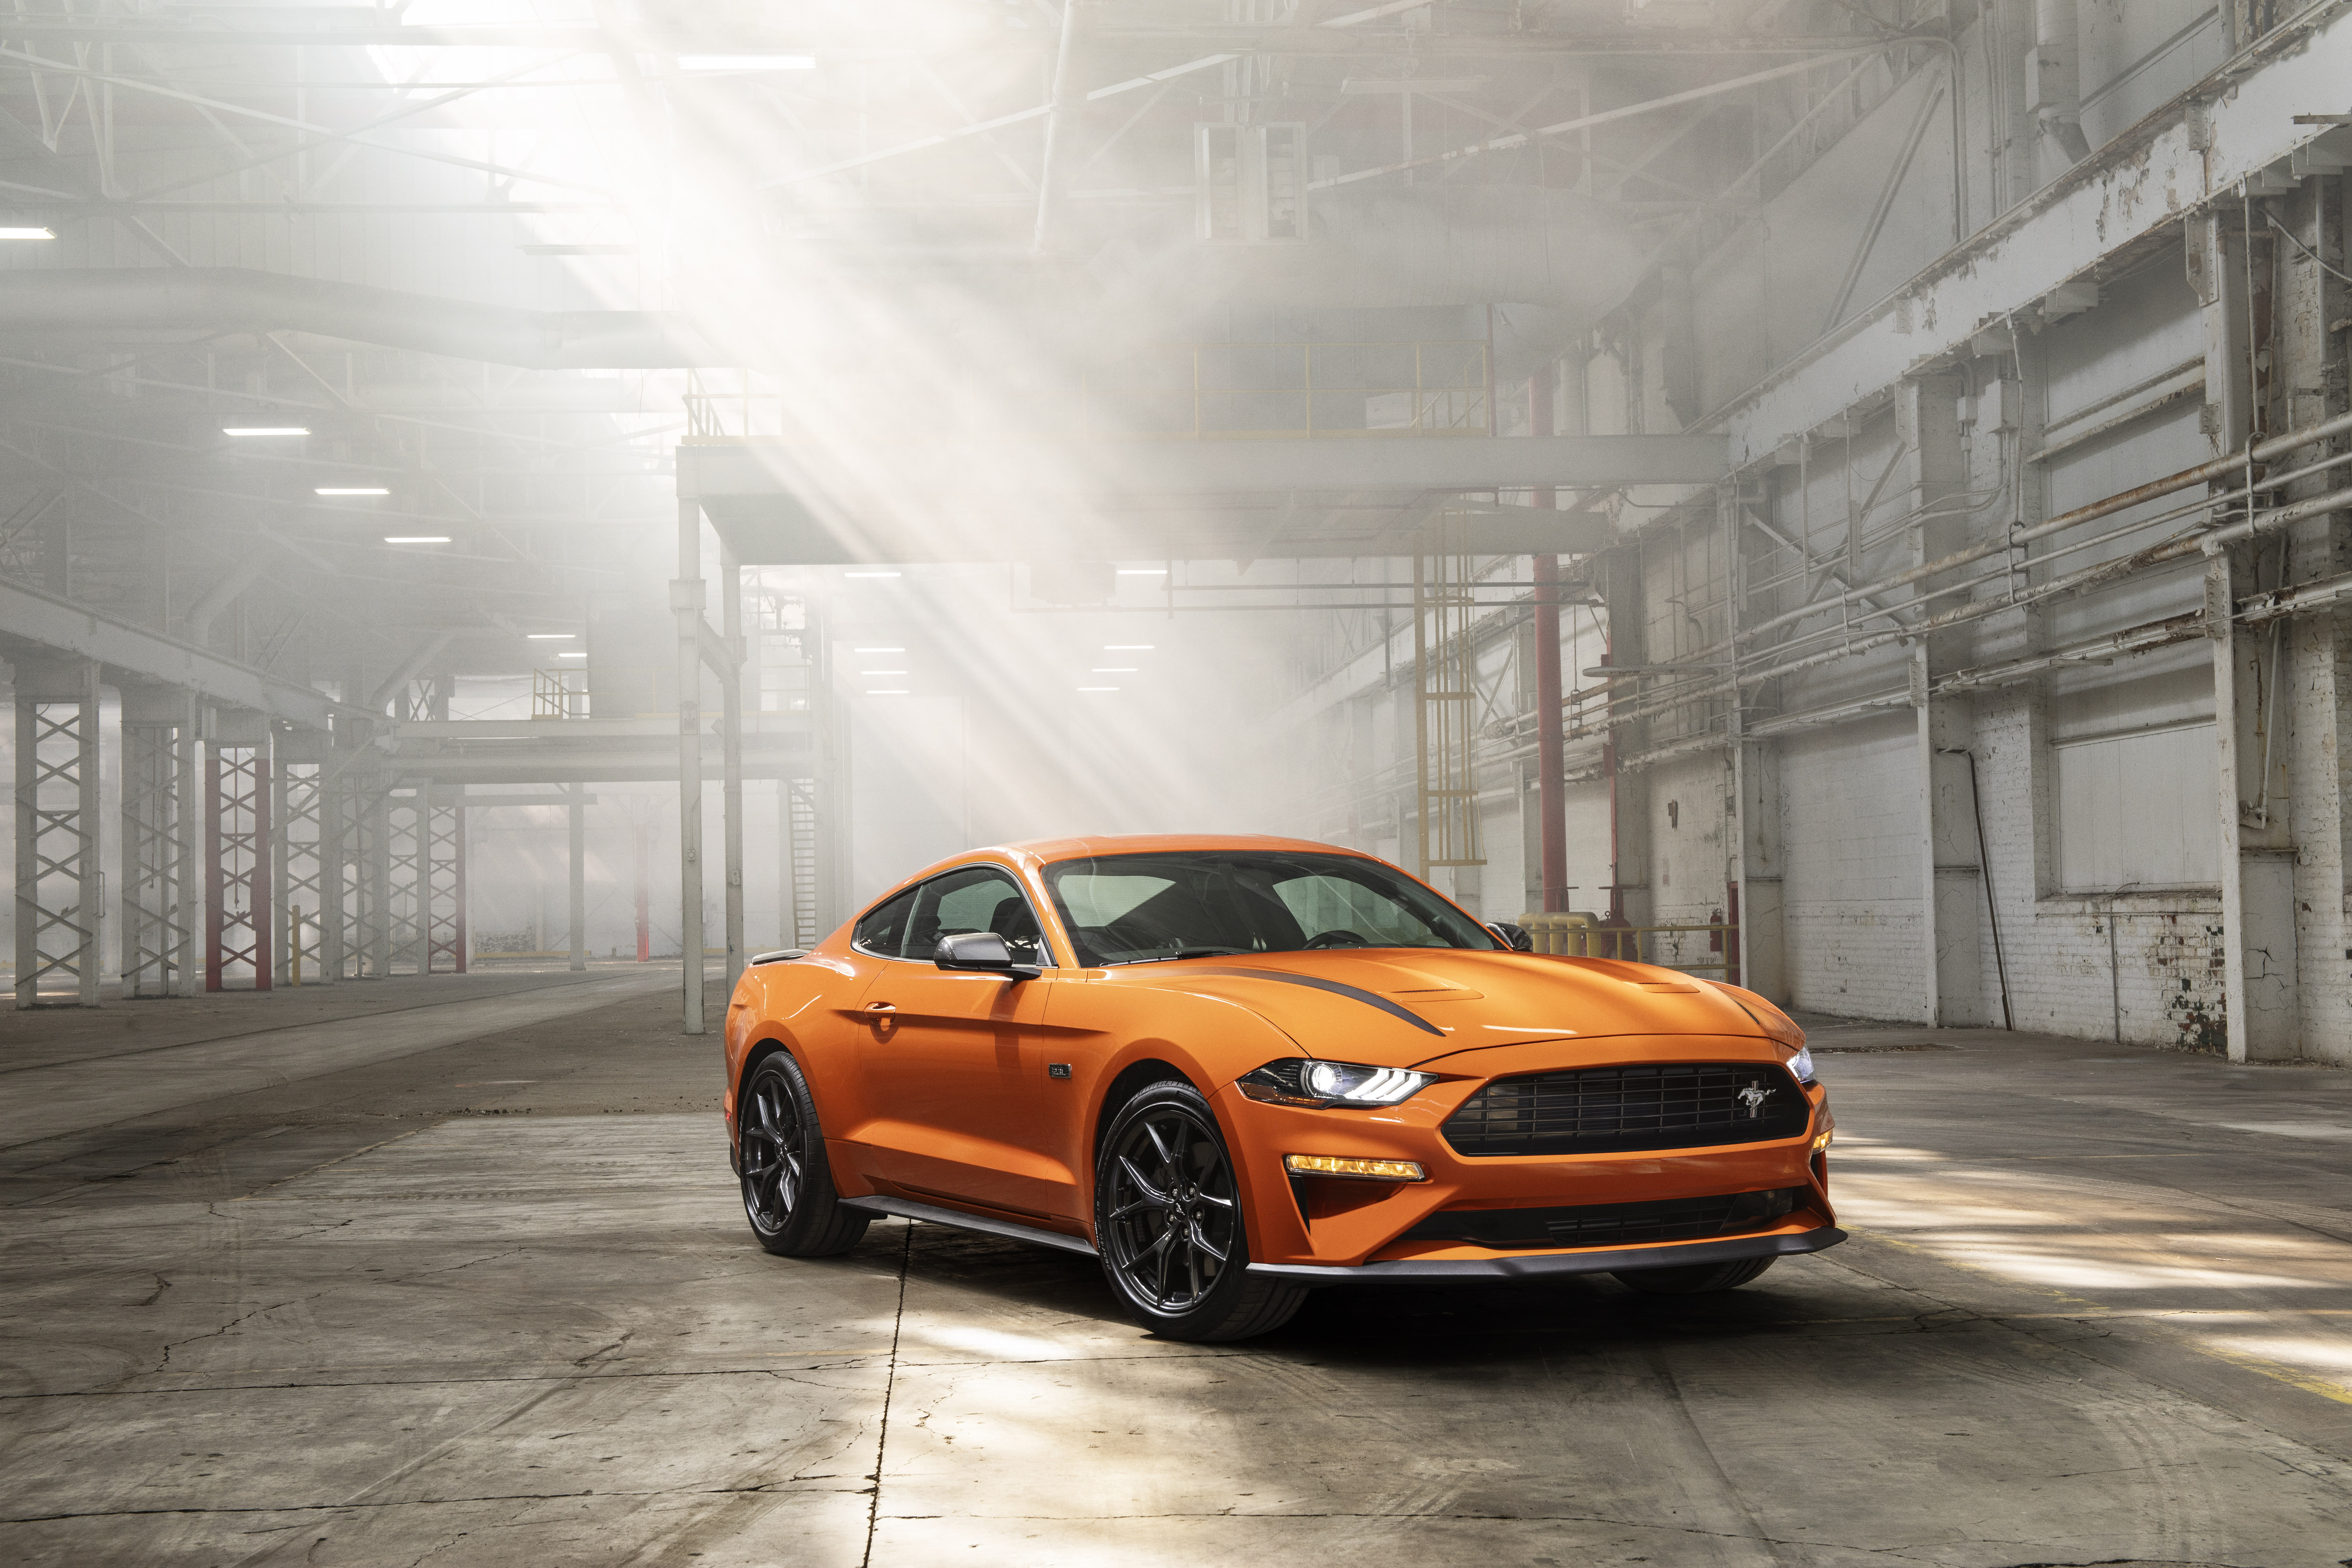 Car Ford Ford Mustang Muscle Car Orange Car Vehicle 6720x4480